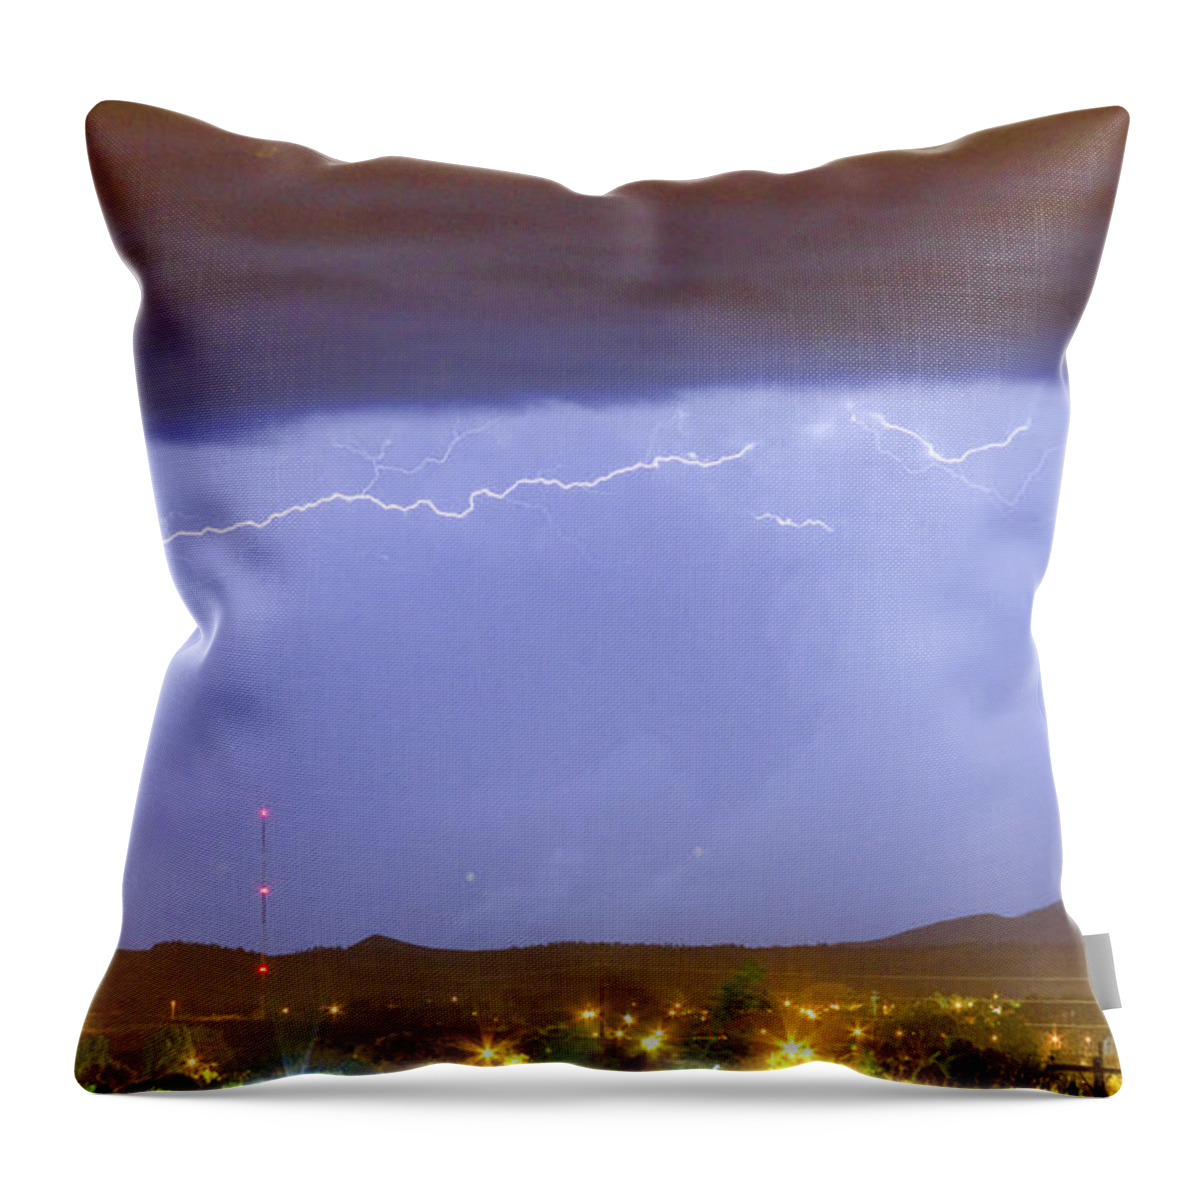 287 Throw Pillow featuring the photograph Northern Colorado Rocky Mountain Front Range Lightning Storm by James BO Insogna